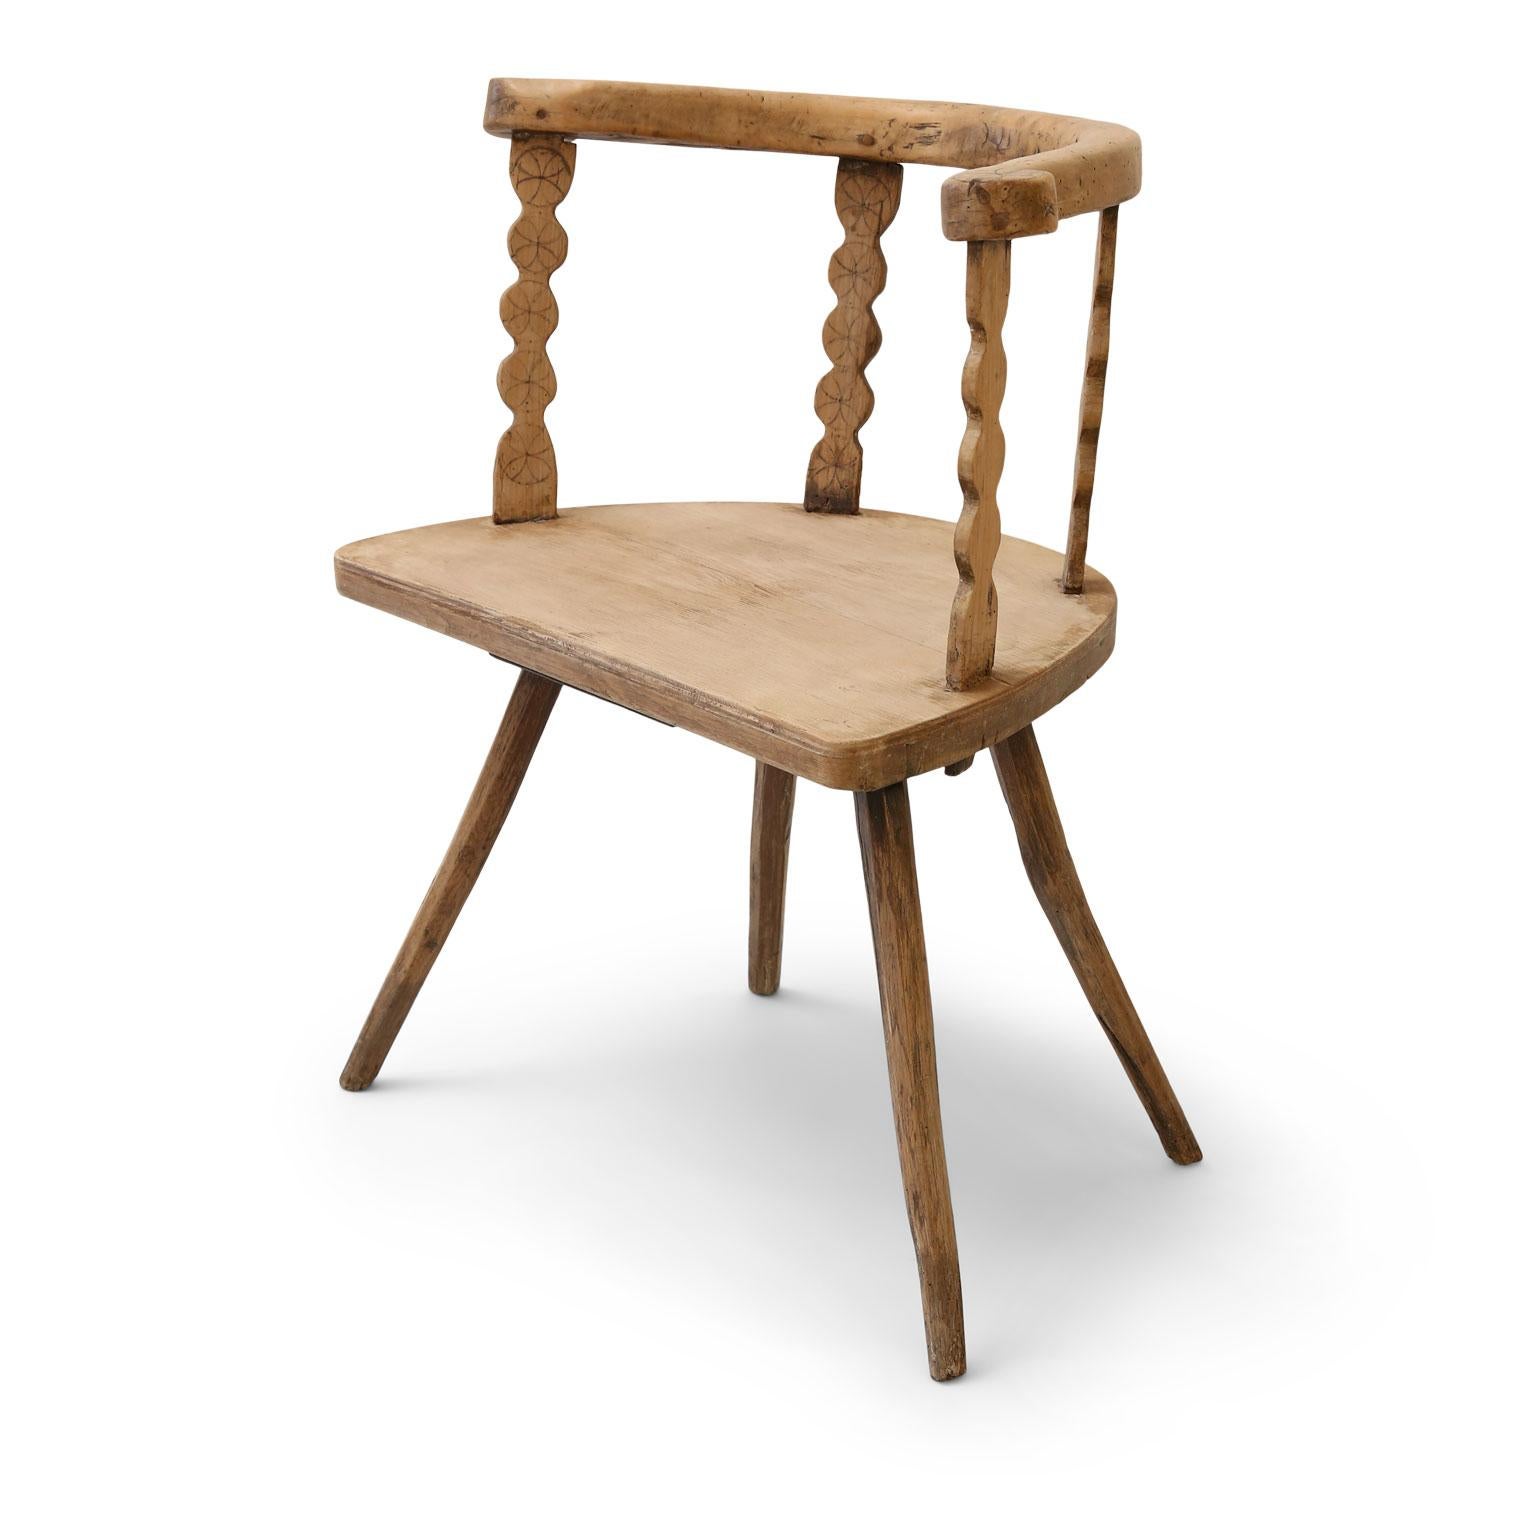 Swedish vernacular chair dating to the early 19th or late 18th century. Nice wide plank seat measuring 17 inches high x 25 inches wide x 16 inches deep. Generous proportioned horse shoe shape back and arms upon shaped slats. Decorated in incised